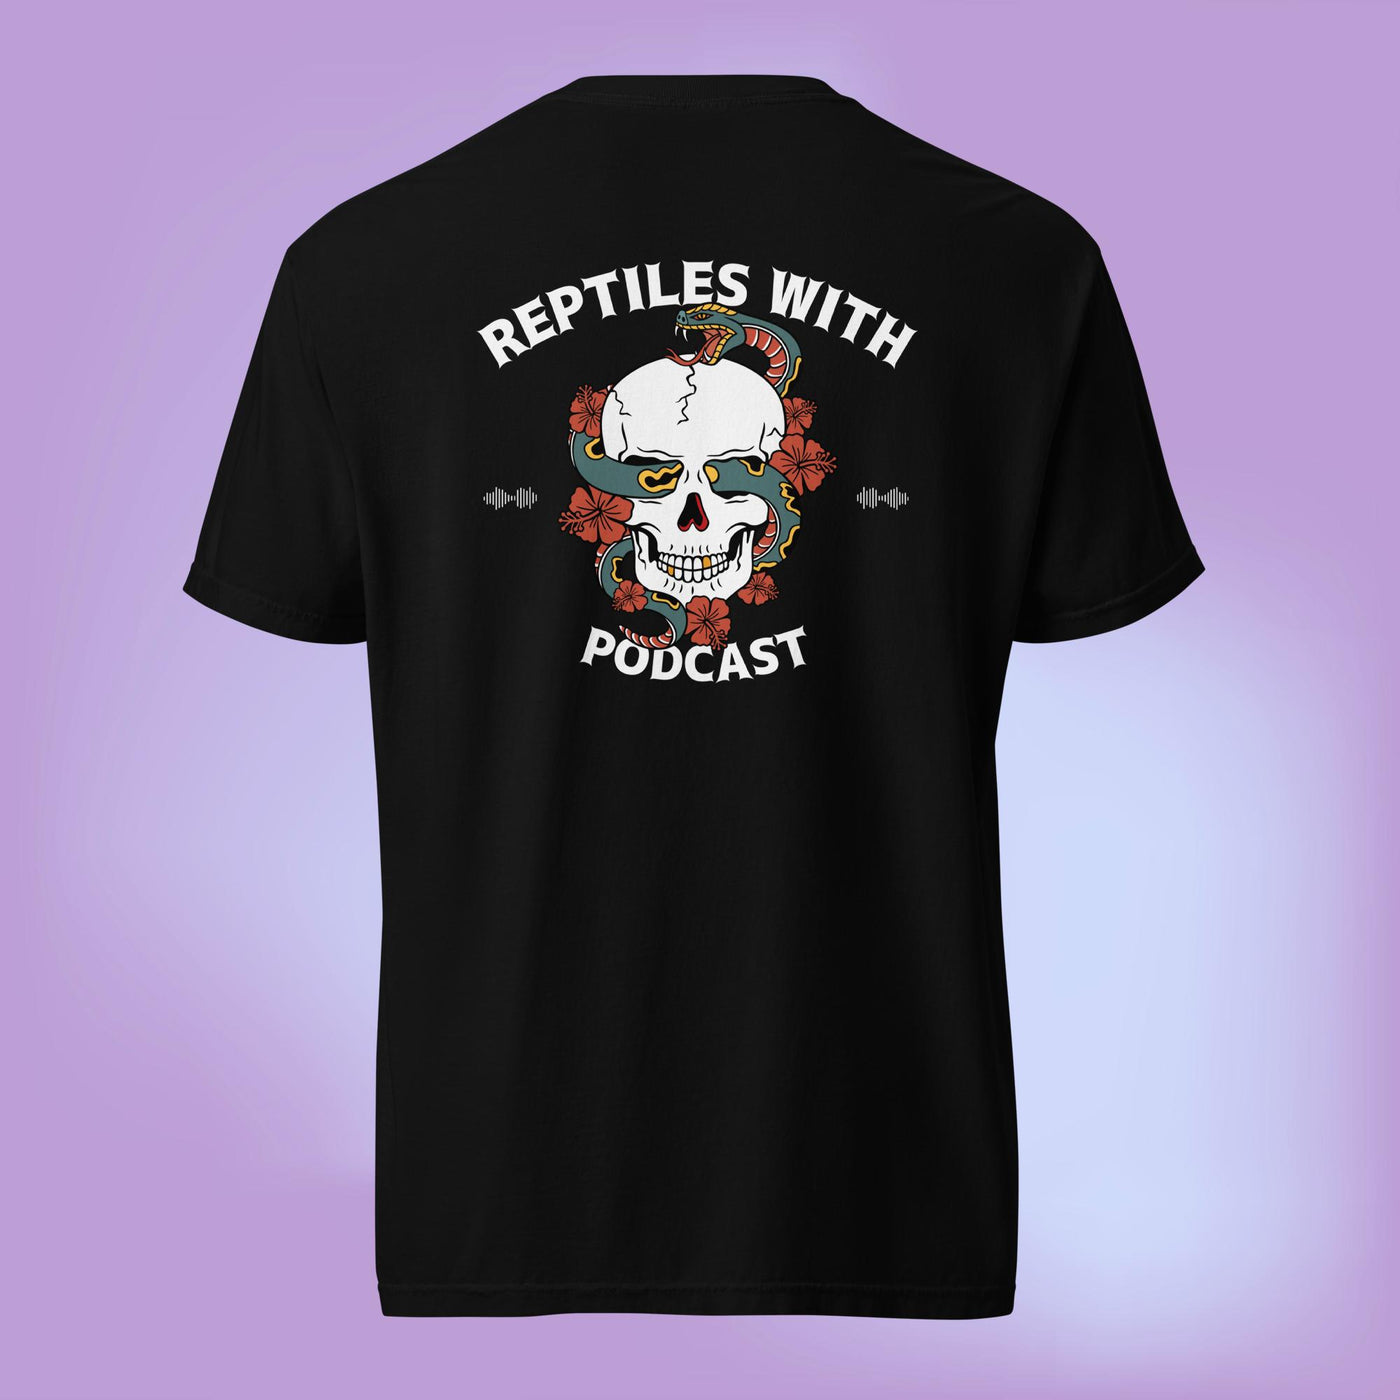 Tattoo Style Reptiles With t-shirt